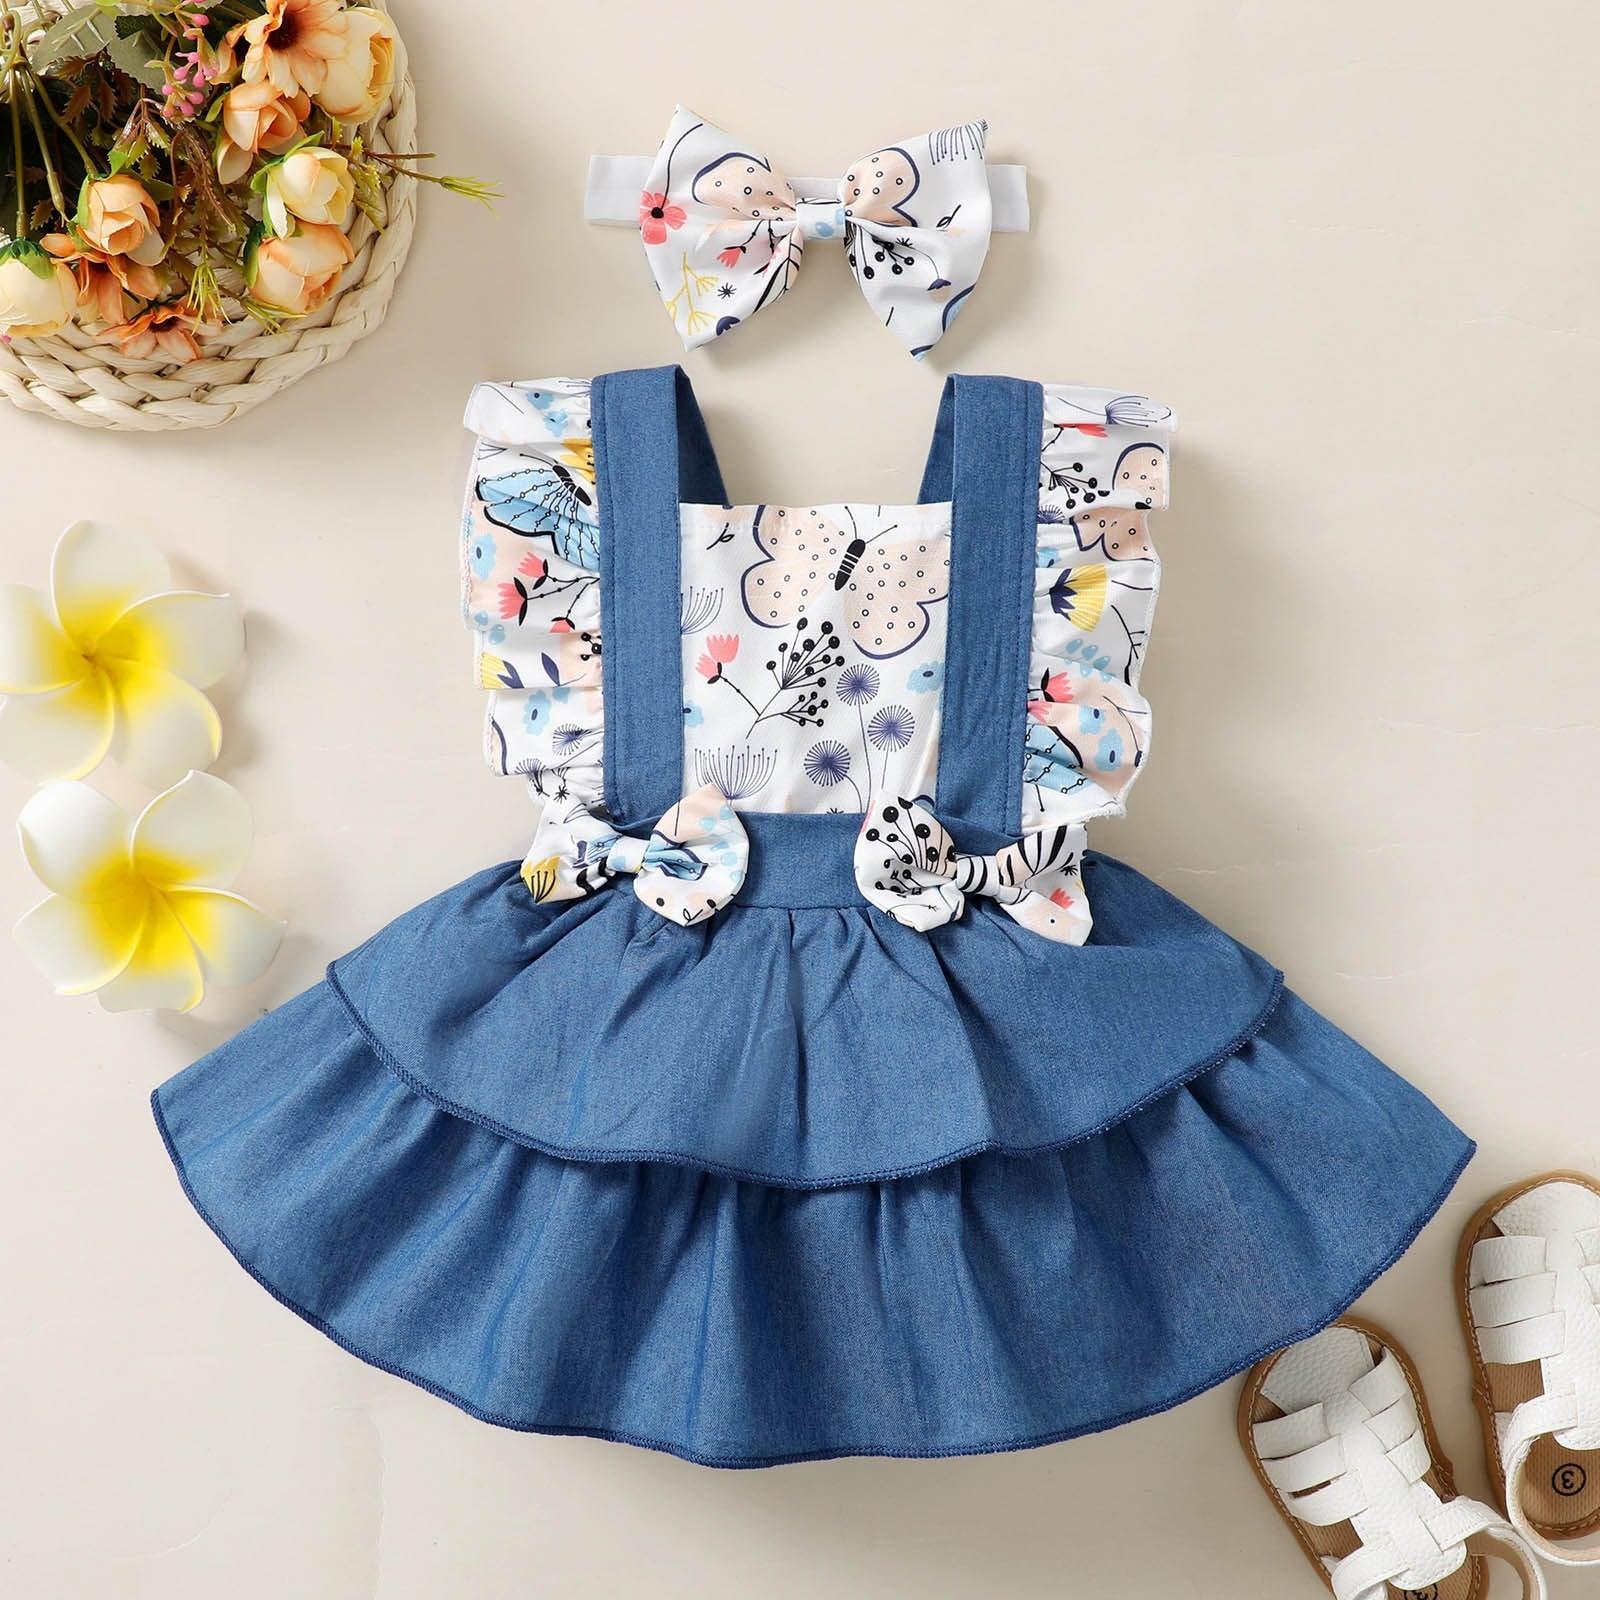 Newborn Baby Girl Summer Dress Set - Butterfly Print Party Princess Dress with Bow and Headband